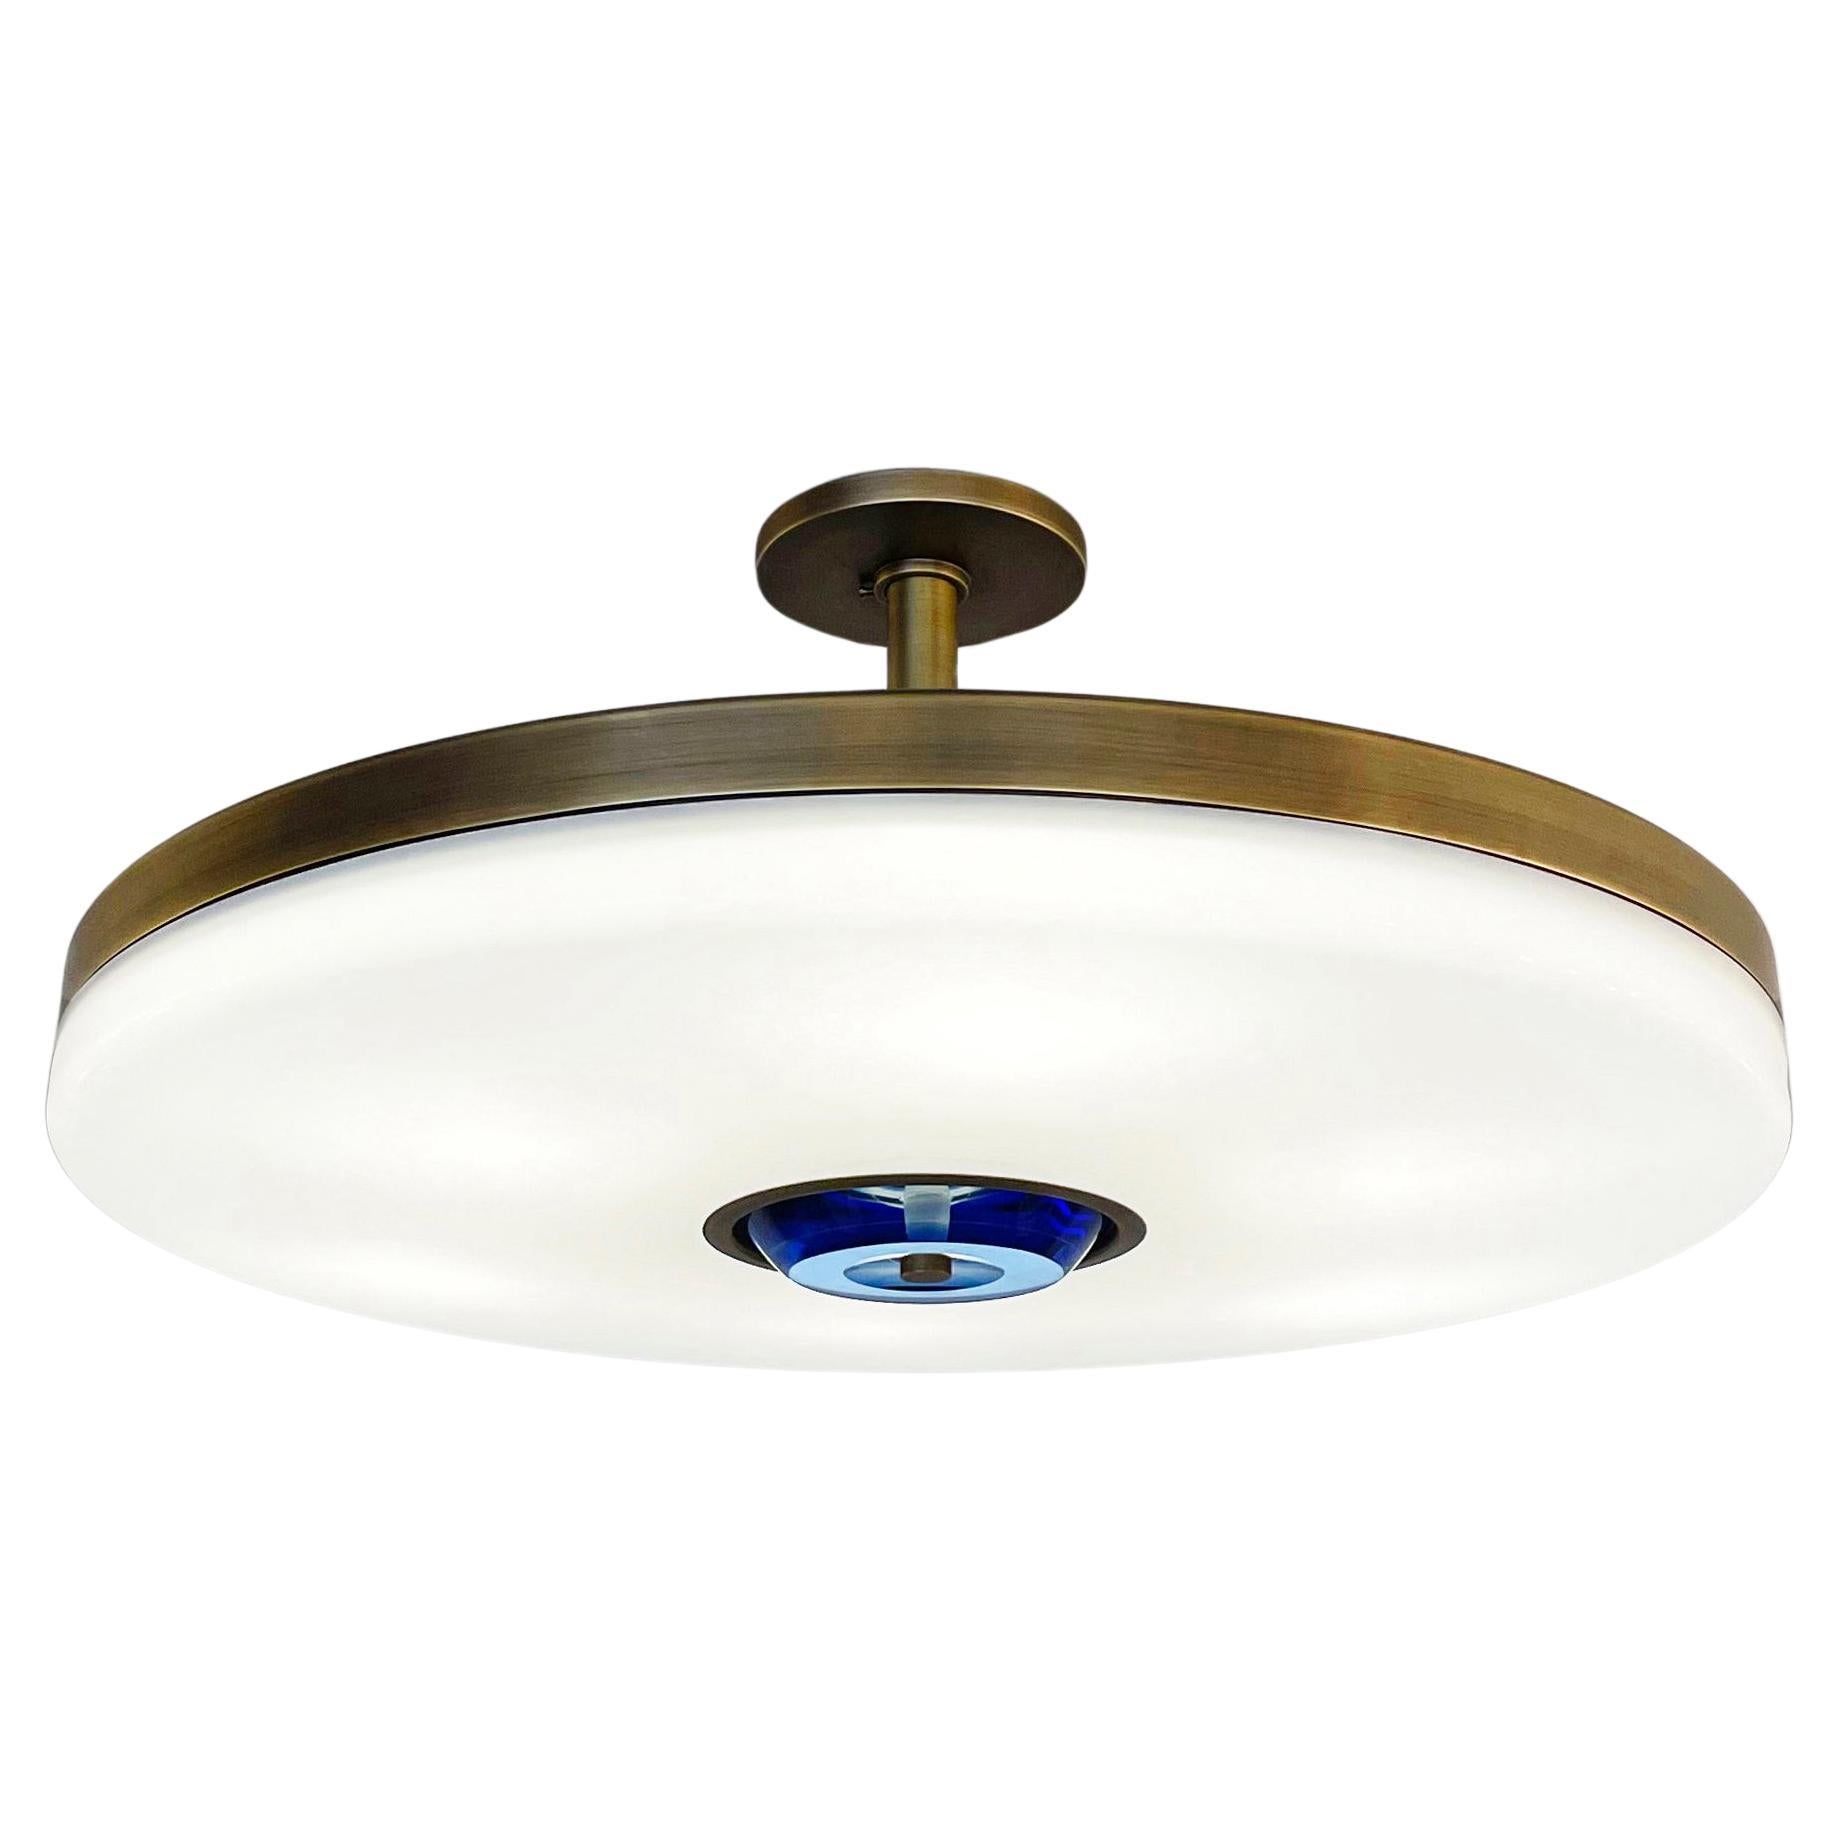 The Iris ceiling is designed around an expansive acrylic shade with a hand carved glass center. This versatile fixture can be installed as a pendant on a stem or as a true flush mount. The first images show the fixture in our Brunito Nero (black